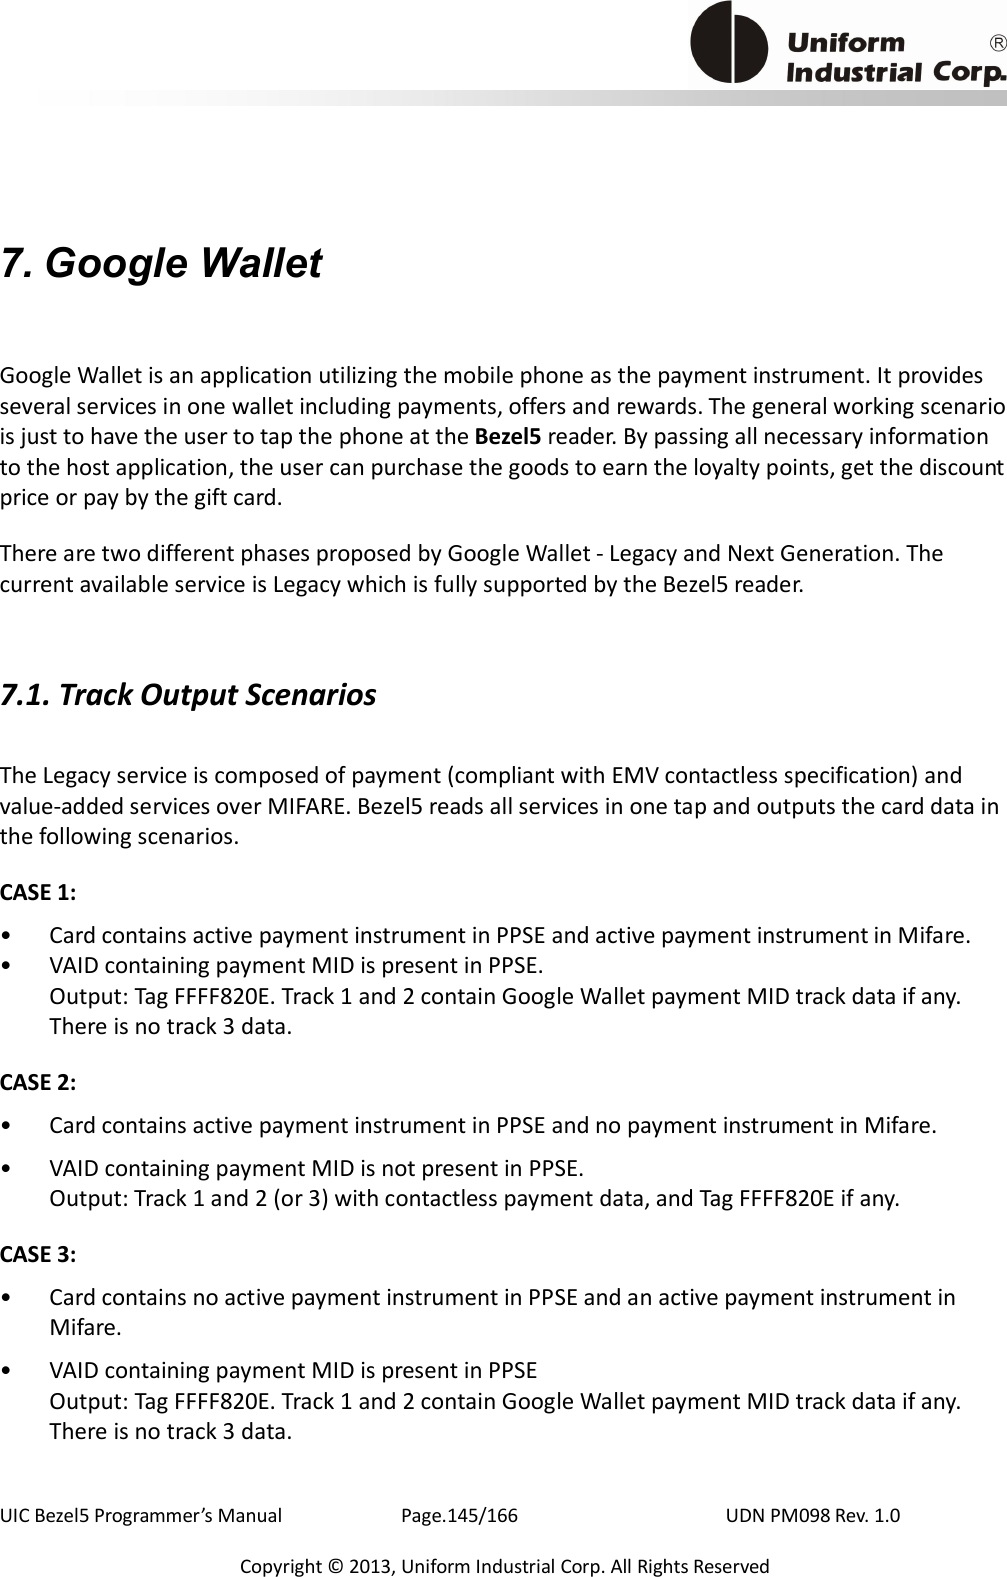                                           UIC Bezel5 Programmer’s Manual      Page.145/166                    UDN PM098 Rev. 1.0 Copyright © 2013, Uniform Industrial Corp. All Rights Reserved 7. Google Wallet Google Wallet is an application utilizing the mobile phone as the payment instrument. It provides several services in one wallet including payments, offers and rewards. The general working scenario is just to have the user to tap the phone at the Bezel5 reader. By passing all necessary information to the host application, the user can purchase the goods to earn the loyalty points, get the discount price or pay by the gift card. There are two different phases proposed by Google Wallet - Legacy and Next Generation. The current available service is Legacy which is fully supported by the Bezel5 reader.   7.1. Track Output Scenarios The Legacy service is composed of payment (compliant with EMV contactless specification) and value-added services over MIFARE. Bezel5 reads all services in one tap and outputs the card data in the following scenarios. CASE 1:   •  Card contains active payment instrument in PPSE and active payment instrument in Mifare. •  VAID containing payment MID is present in PPSE. Output: Tag FFFF820E. Track 1 and 2 contain Google Wallet payment MID track data if any. There is no track 3 data. CASE 2: •  Card contains active payment instrument in PPSE and no payment instrument in Mifare. •  VAID containing payment MID is not present in PPSE. Output: Track 1 and 2 (or 3) with contactless payment data, and Tag FFFF820E if any. CASE 3: •  Card contains no active payment instrument in PPSE and an active payment instrument in Mifare. •  VAID containing payment MID is present in PPSE Output: Tag FFFF820E. Track 1 and 2 contain Google Wallet payment MID track data if any. There is no track 3 data. 